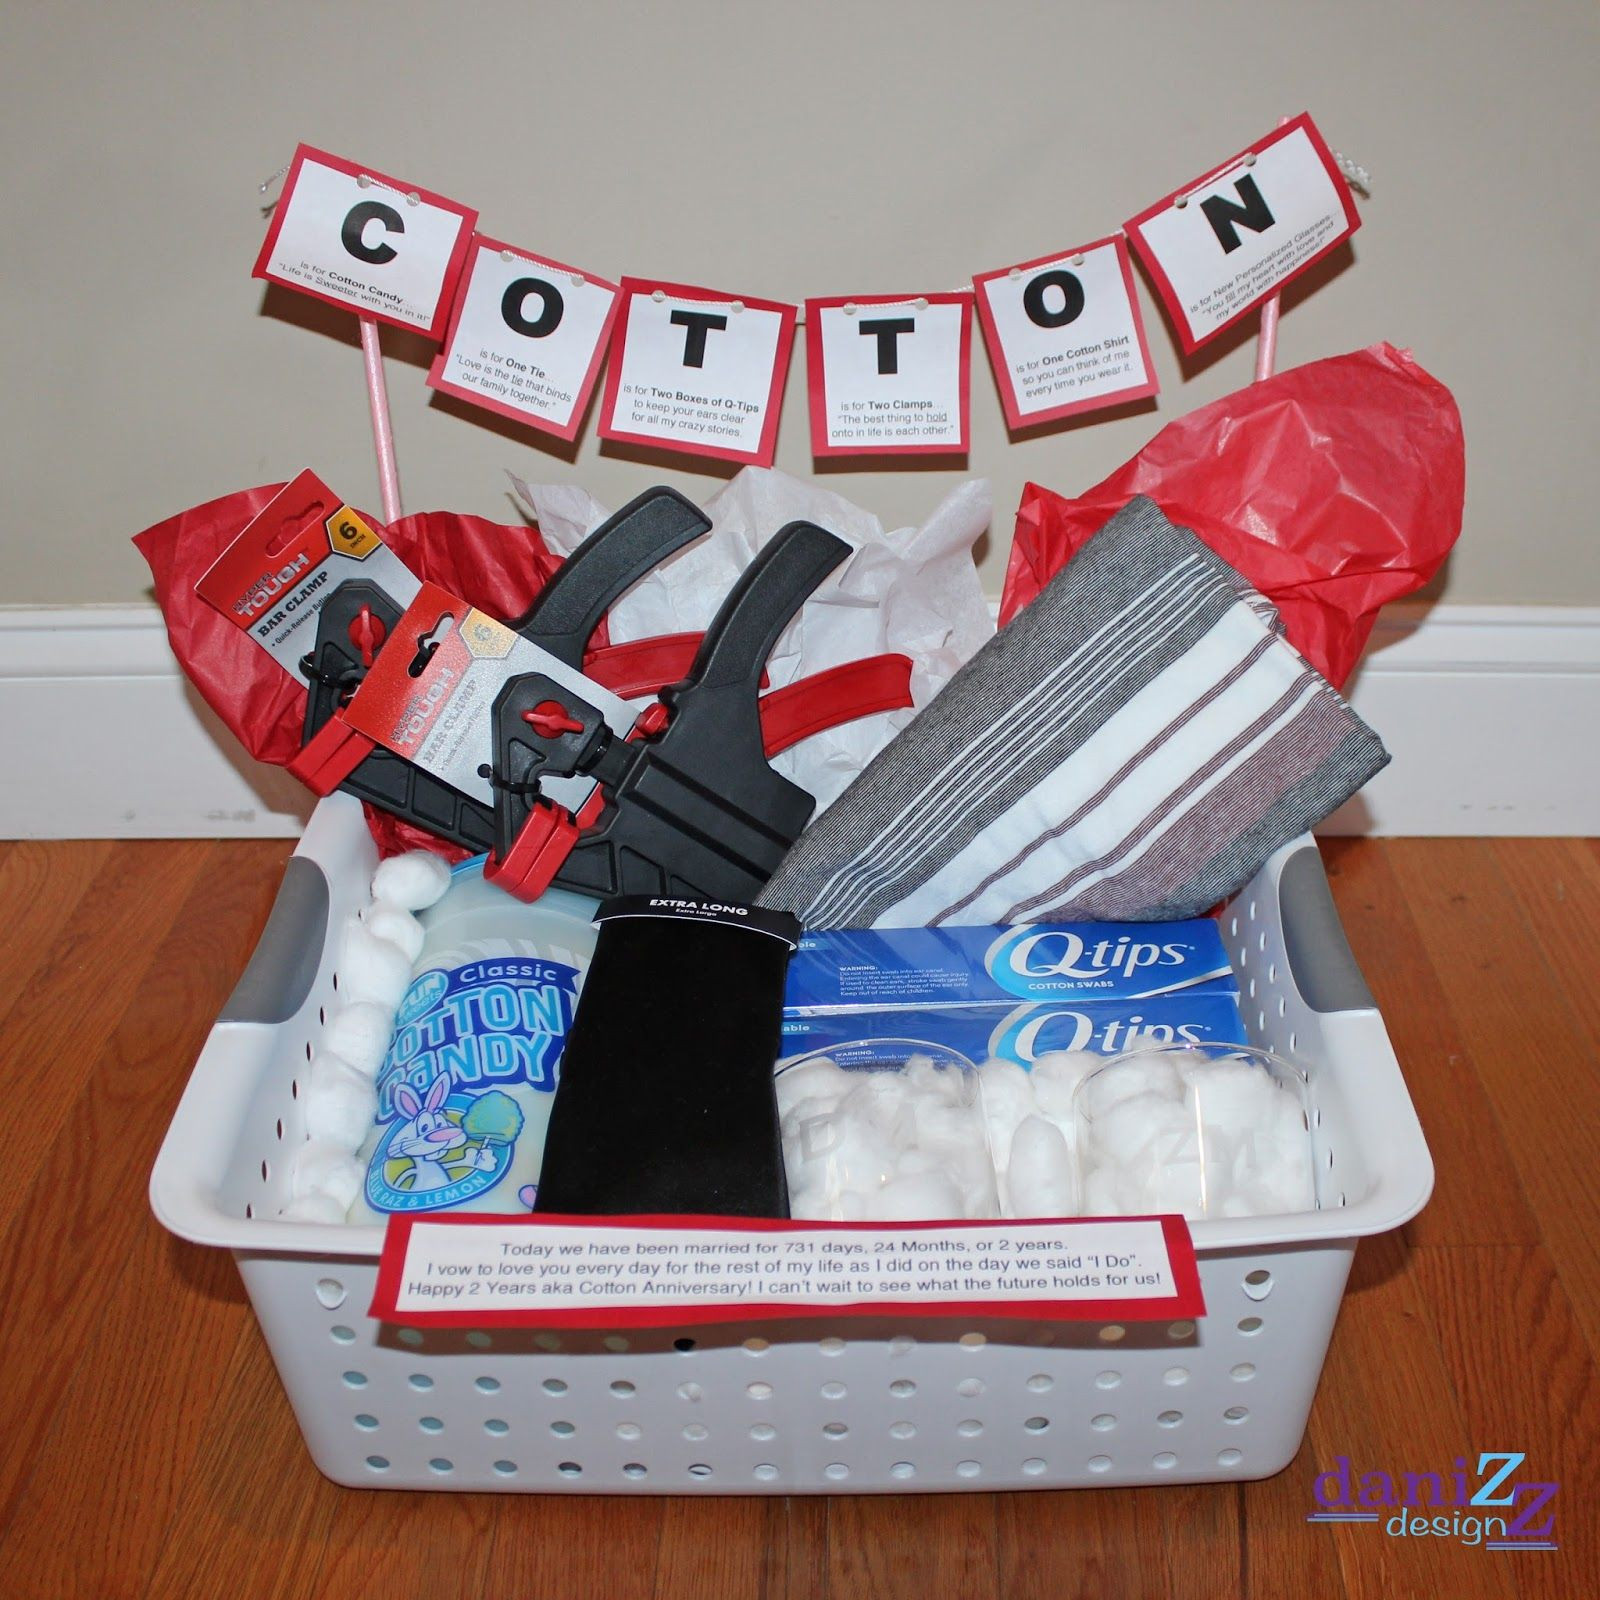 2Nd Year Anniversary Gift Ideas For Him
 Cotton Anniversary Gift Basket plus several more t